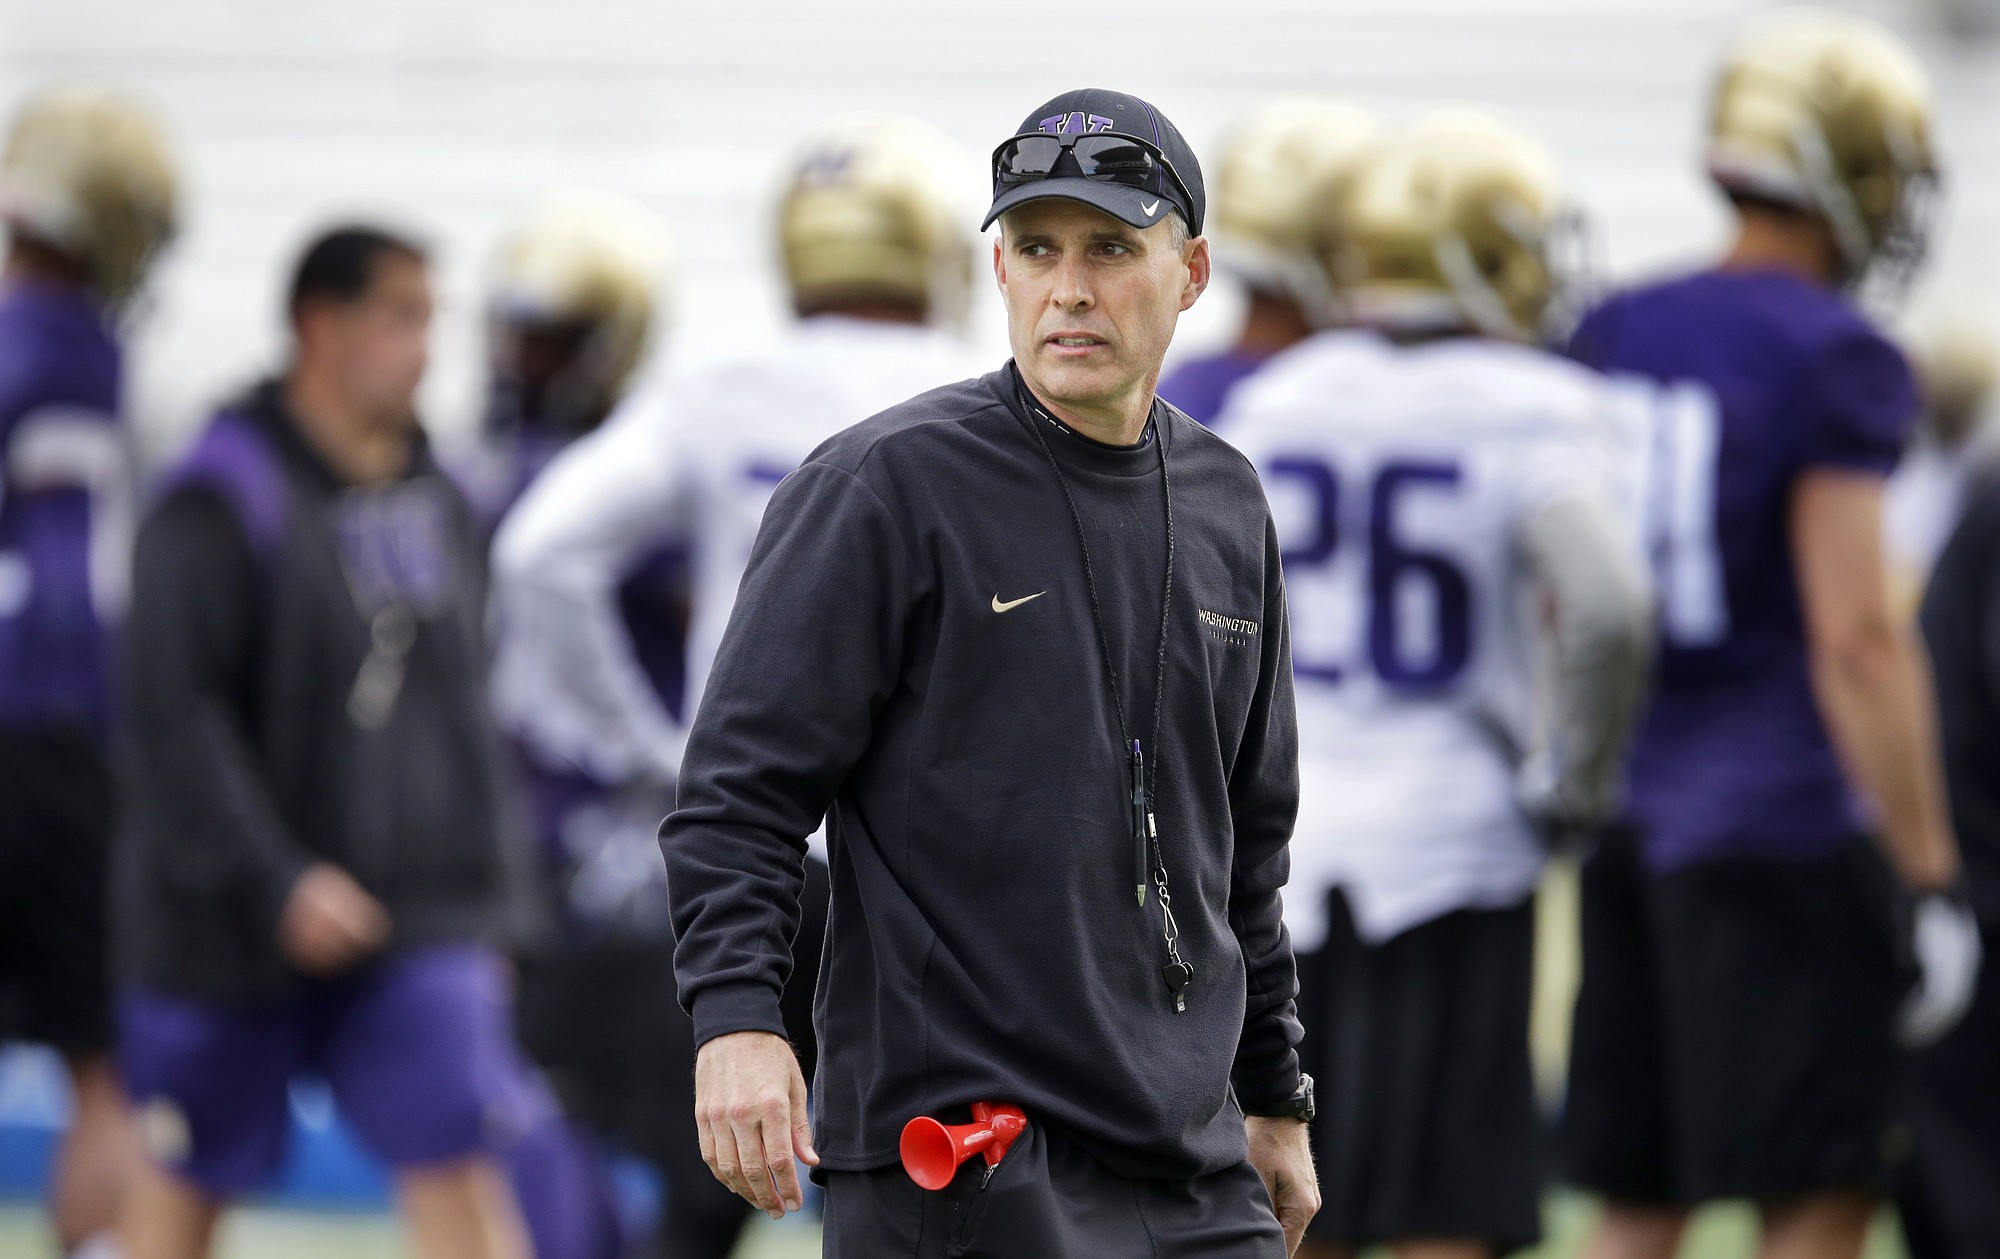 Washington head coach Chris Petersen watches NCAA college football practice drills, Monday, March 30, 2015, on the first day of spring practice in Seattle. (AP Photo/Ted S.